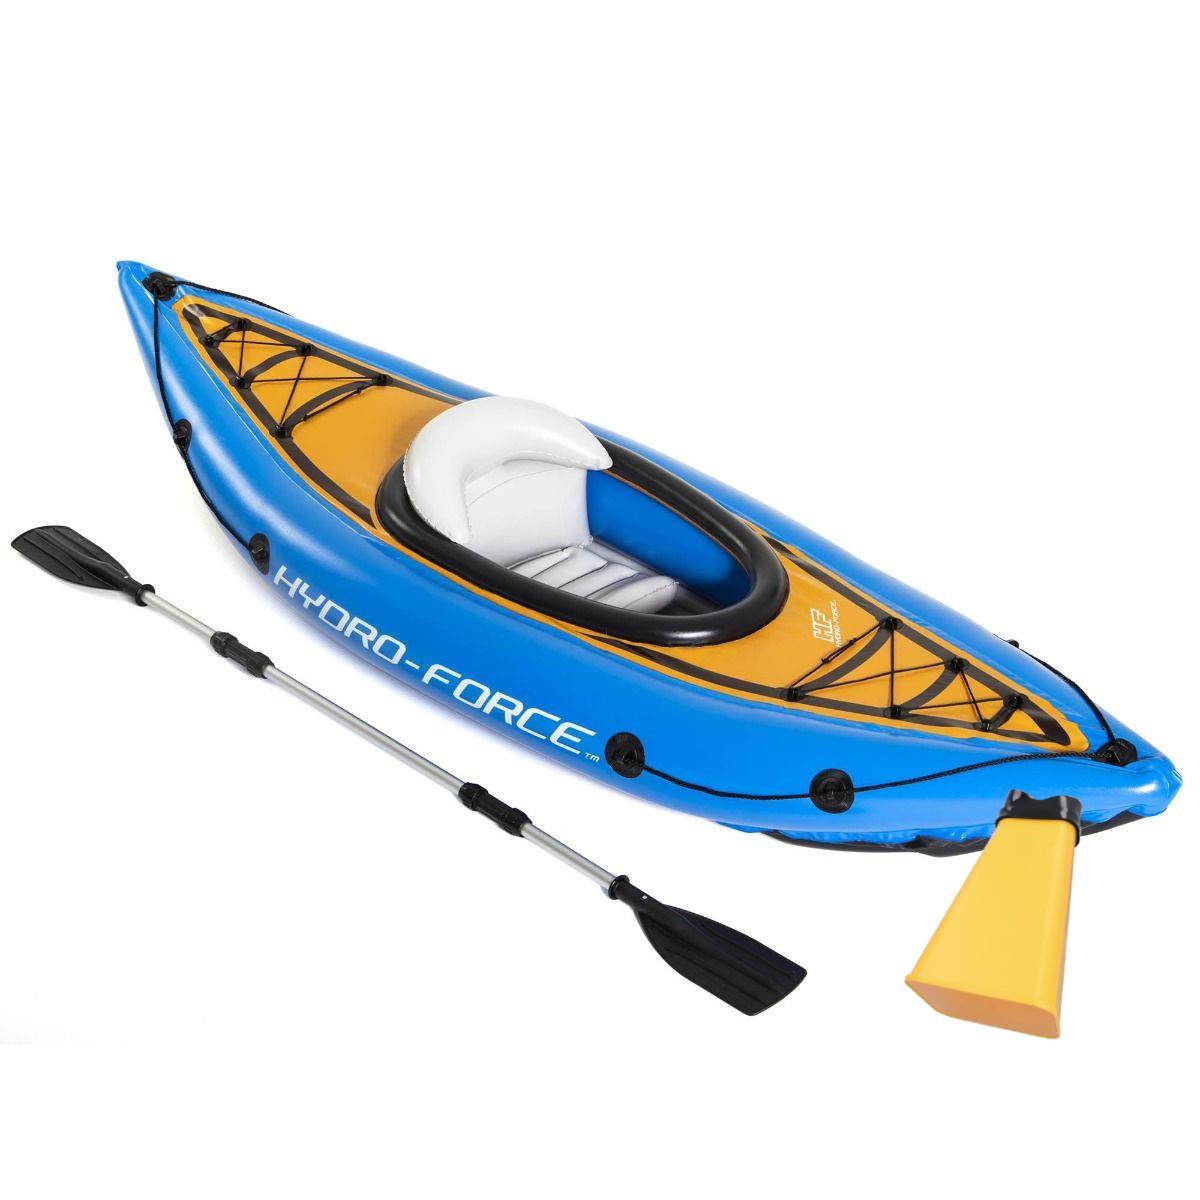 Underwater View Cove Champion Inflatable Kayak with Aquascope Canoe Boat